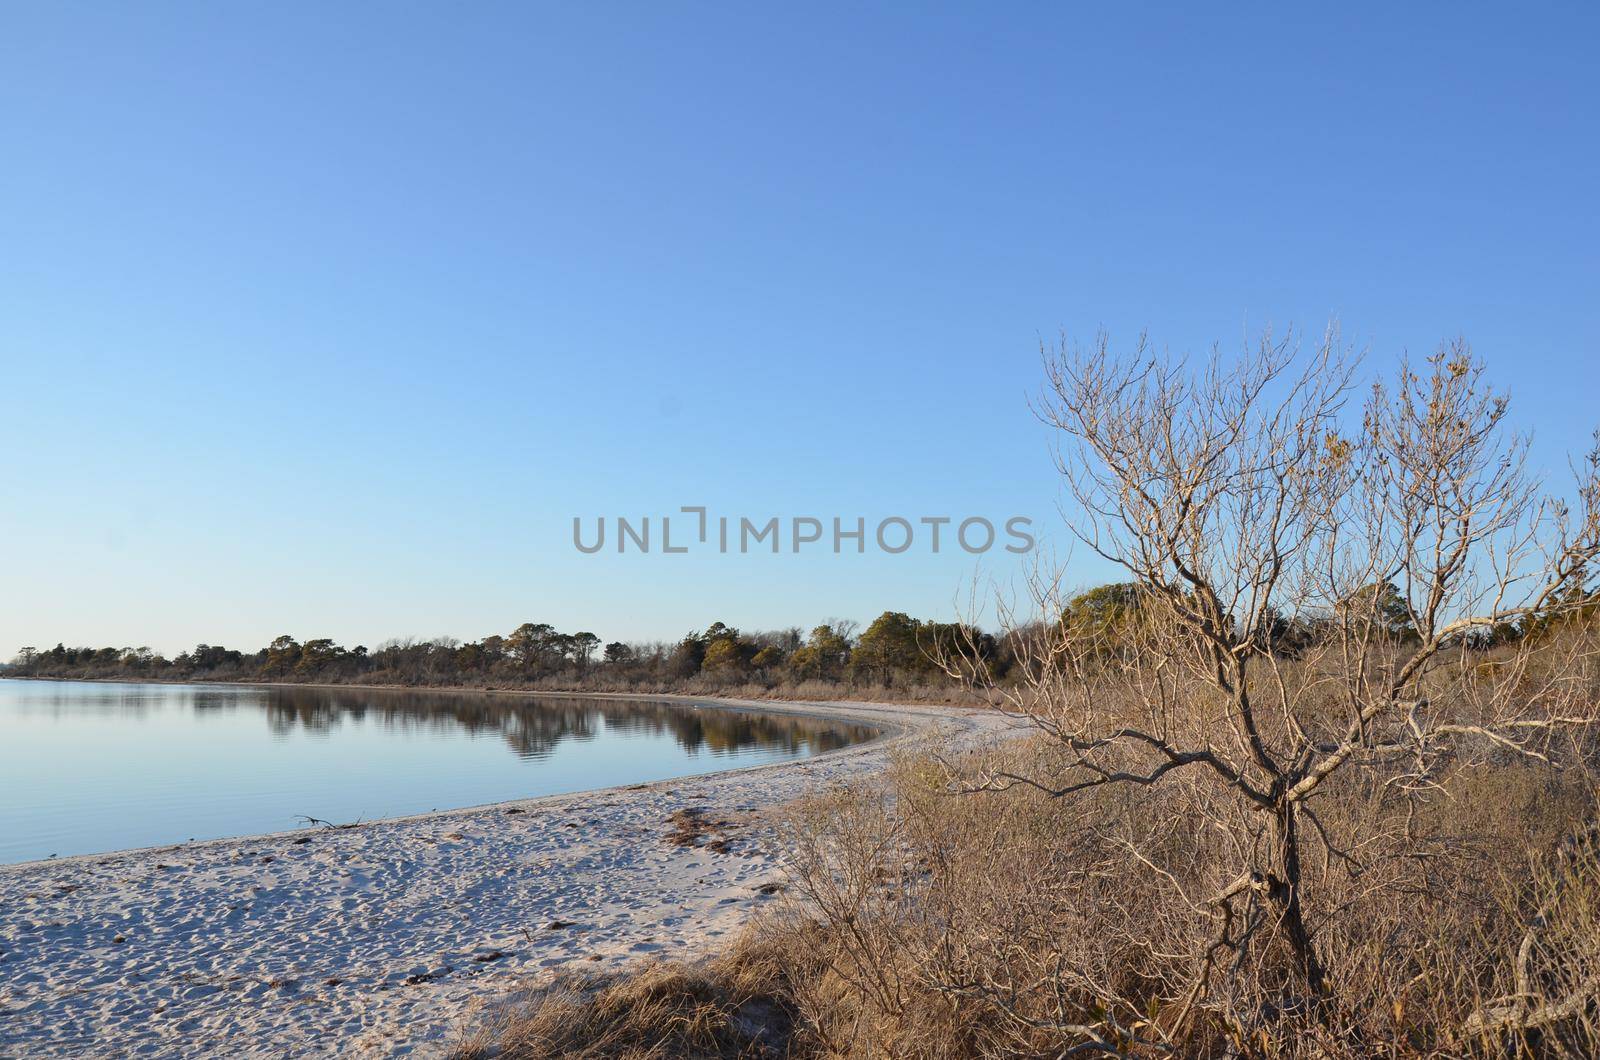 a lake or river with brown grasses and shore with sand by stockphotofan1